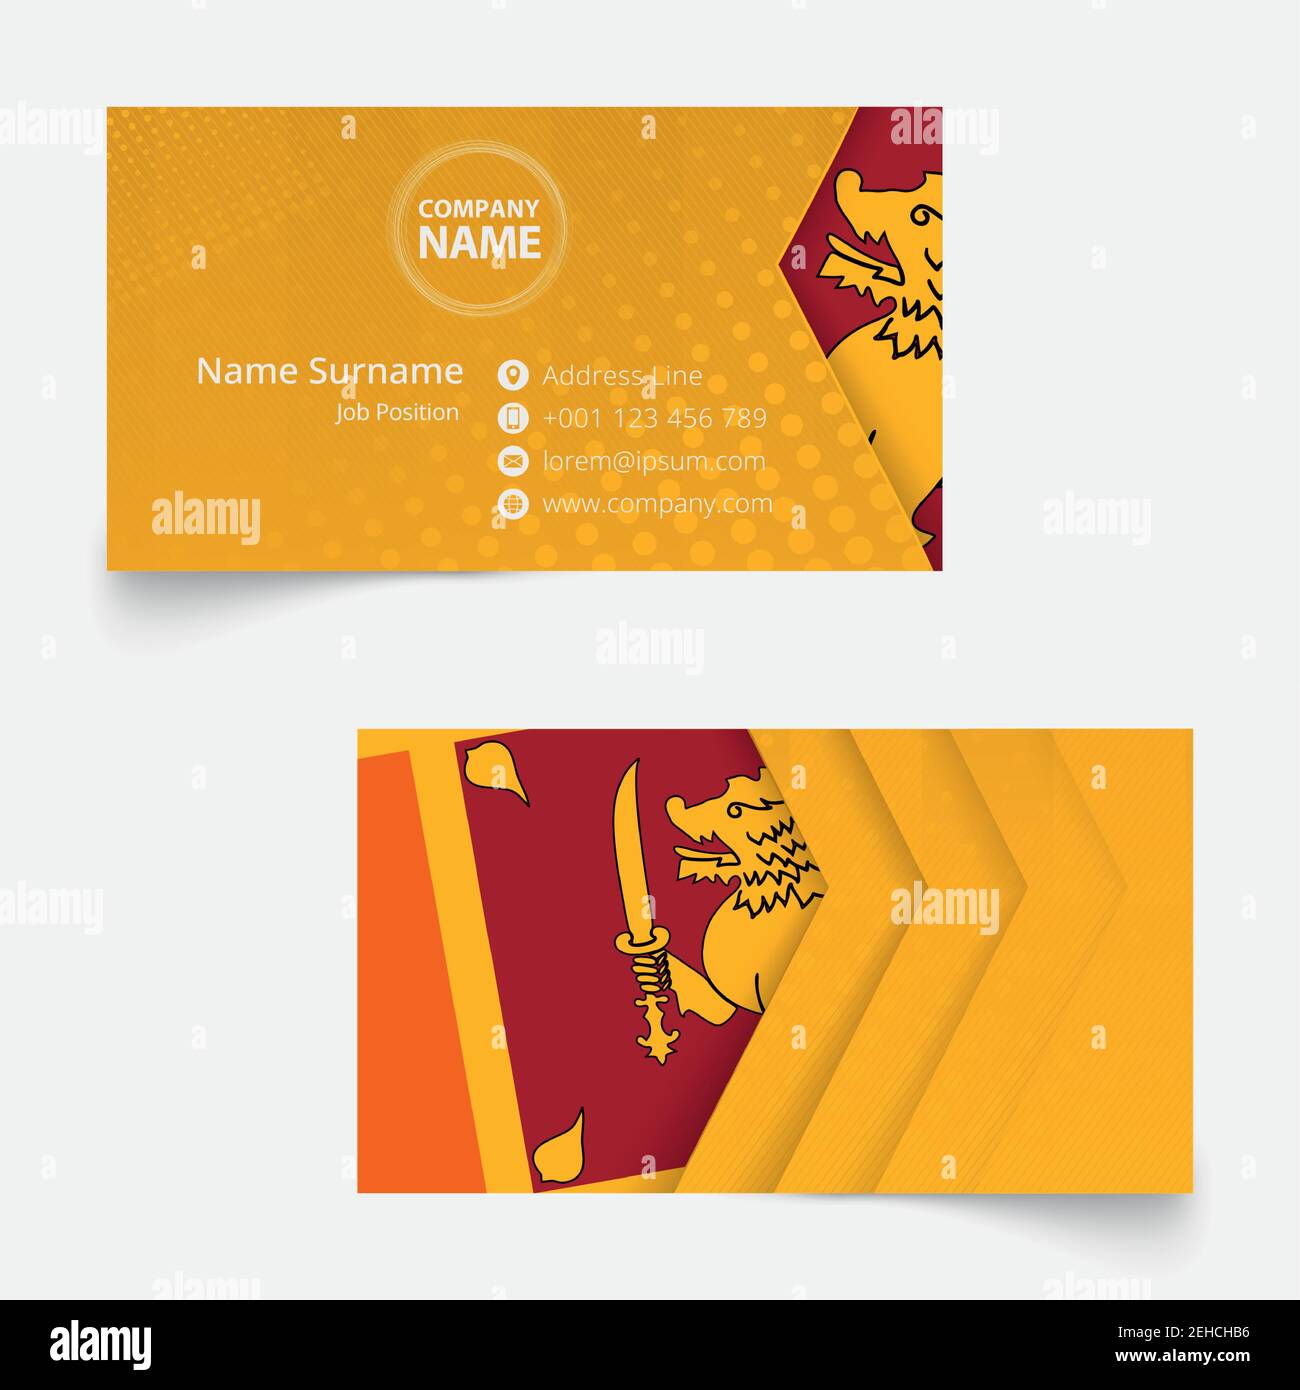 Sri Lanka Flag Business Card Standard Size 90x50 Mm Business Card Template With Bleed Under The Clipping Mask Stock Vector Image Art Alamy